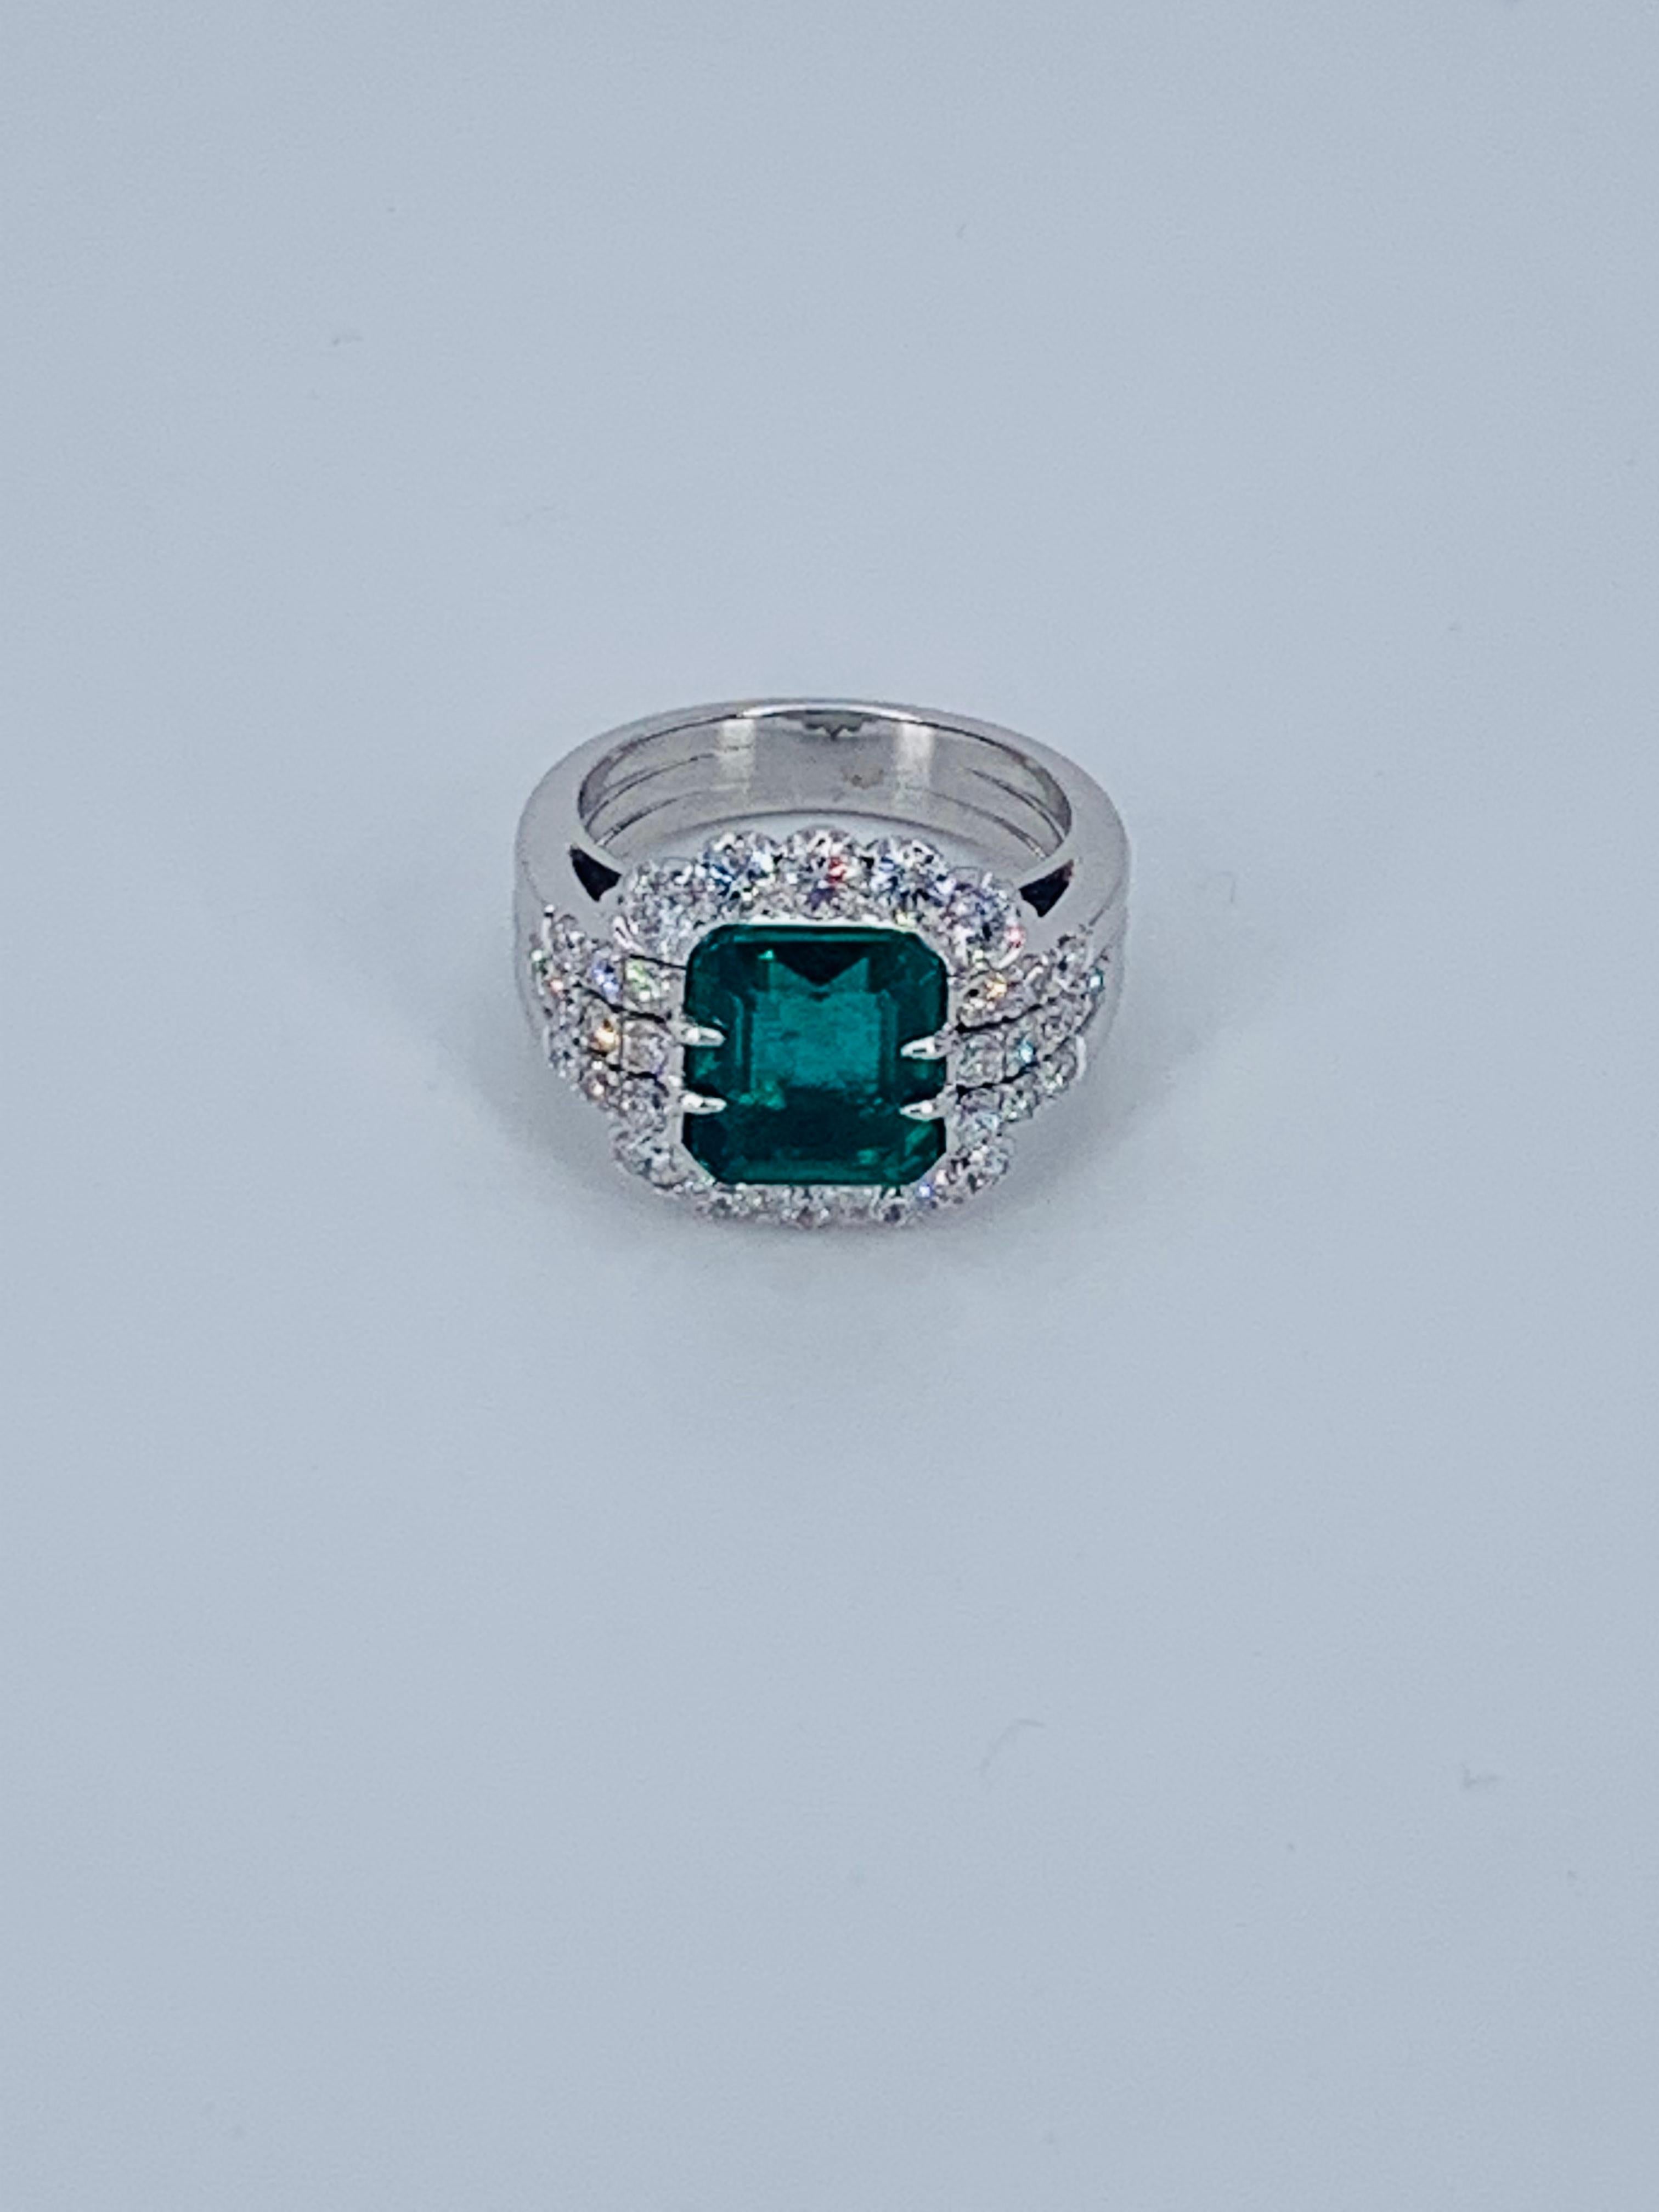 This beautiful Colombian Emerald Floral designed Diamond Halo cocktail ring, is truly stunning. Nestled amongst multiple Diamonds the Emerald is cushioned in the centre. 

The bright white natural Diamonds compliment the precious jewel and extend